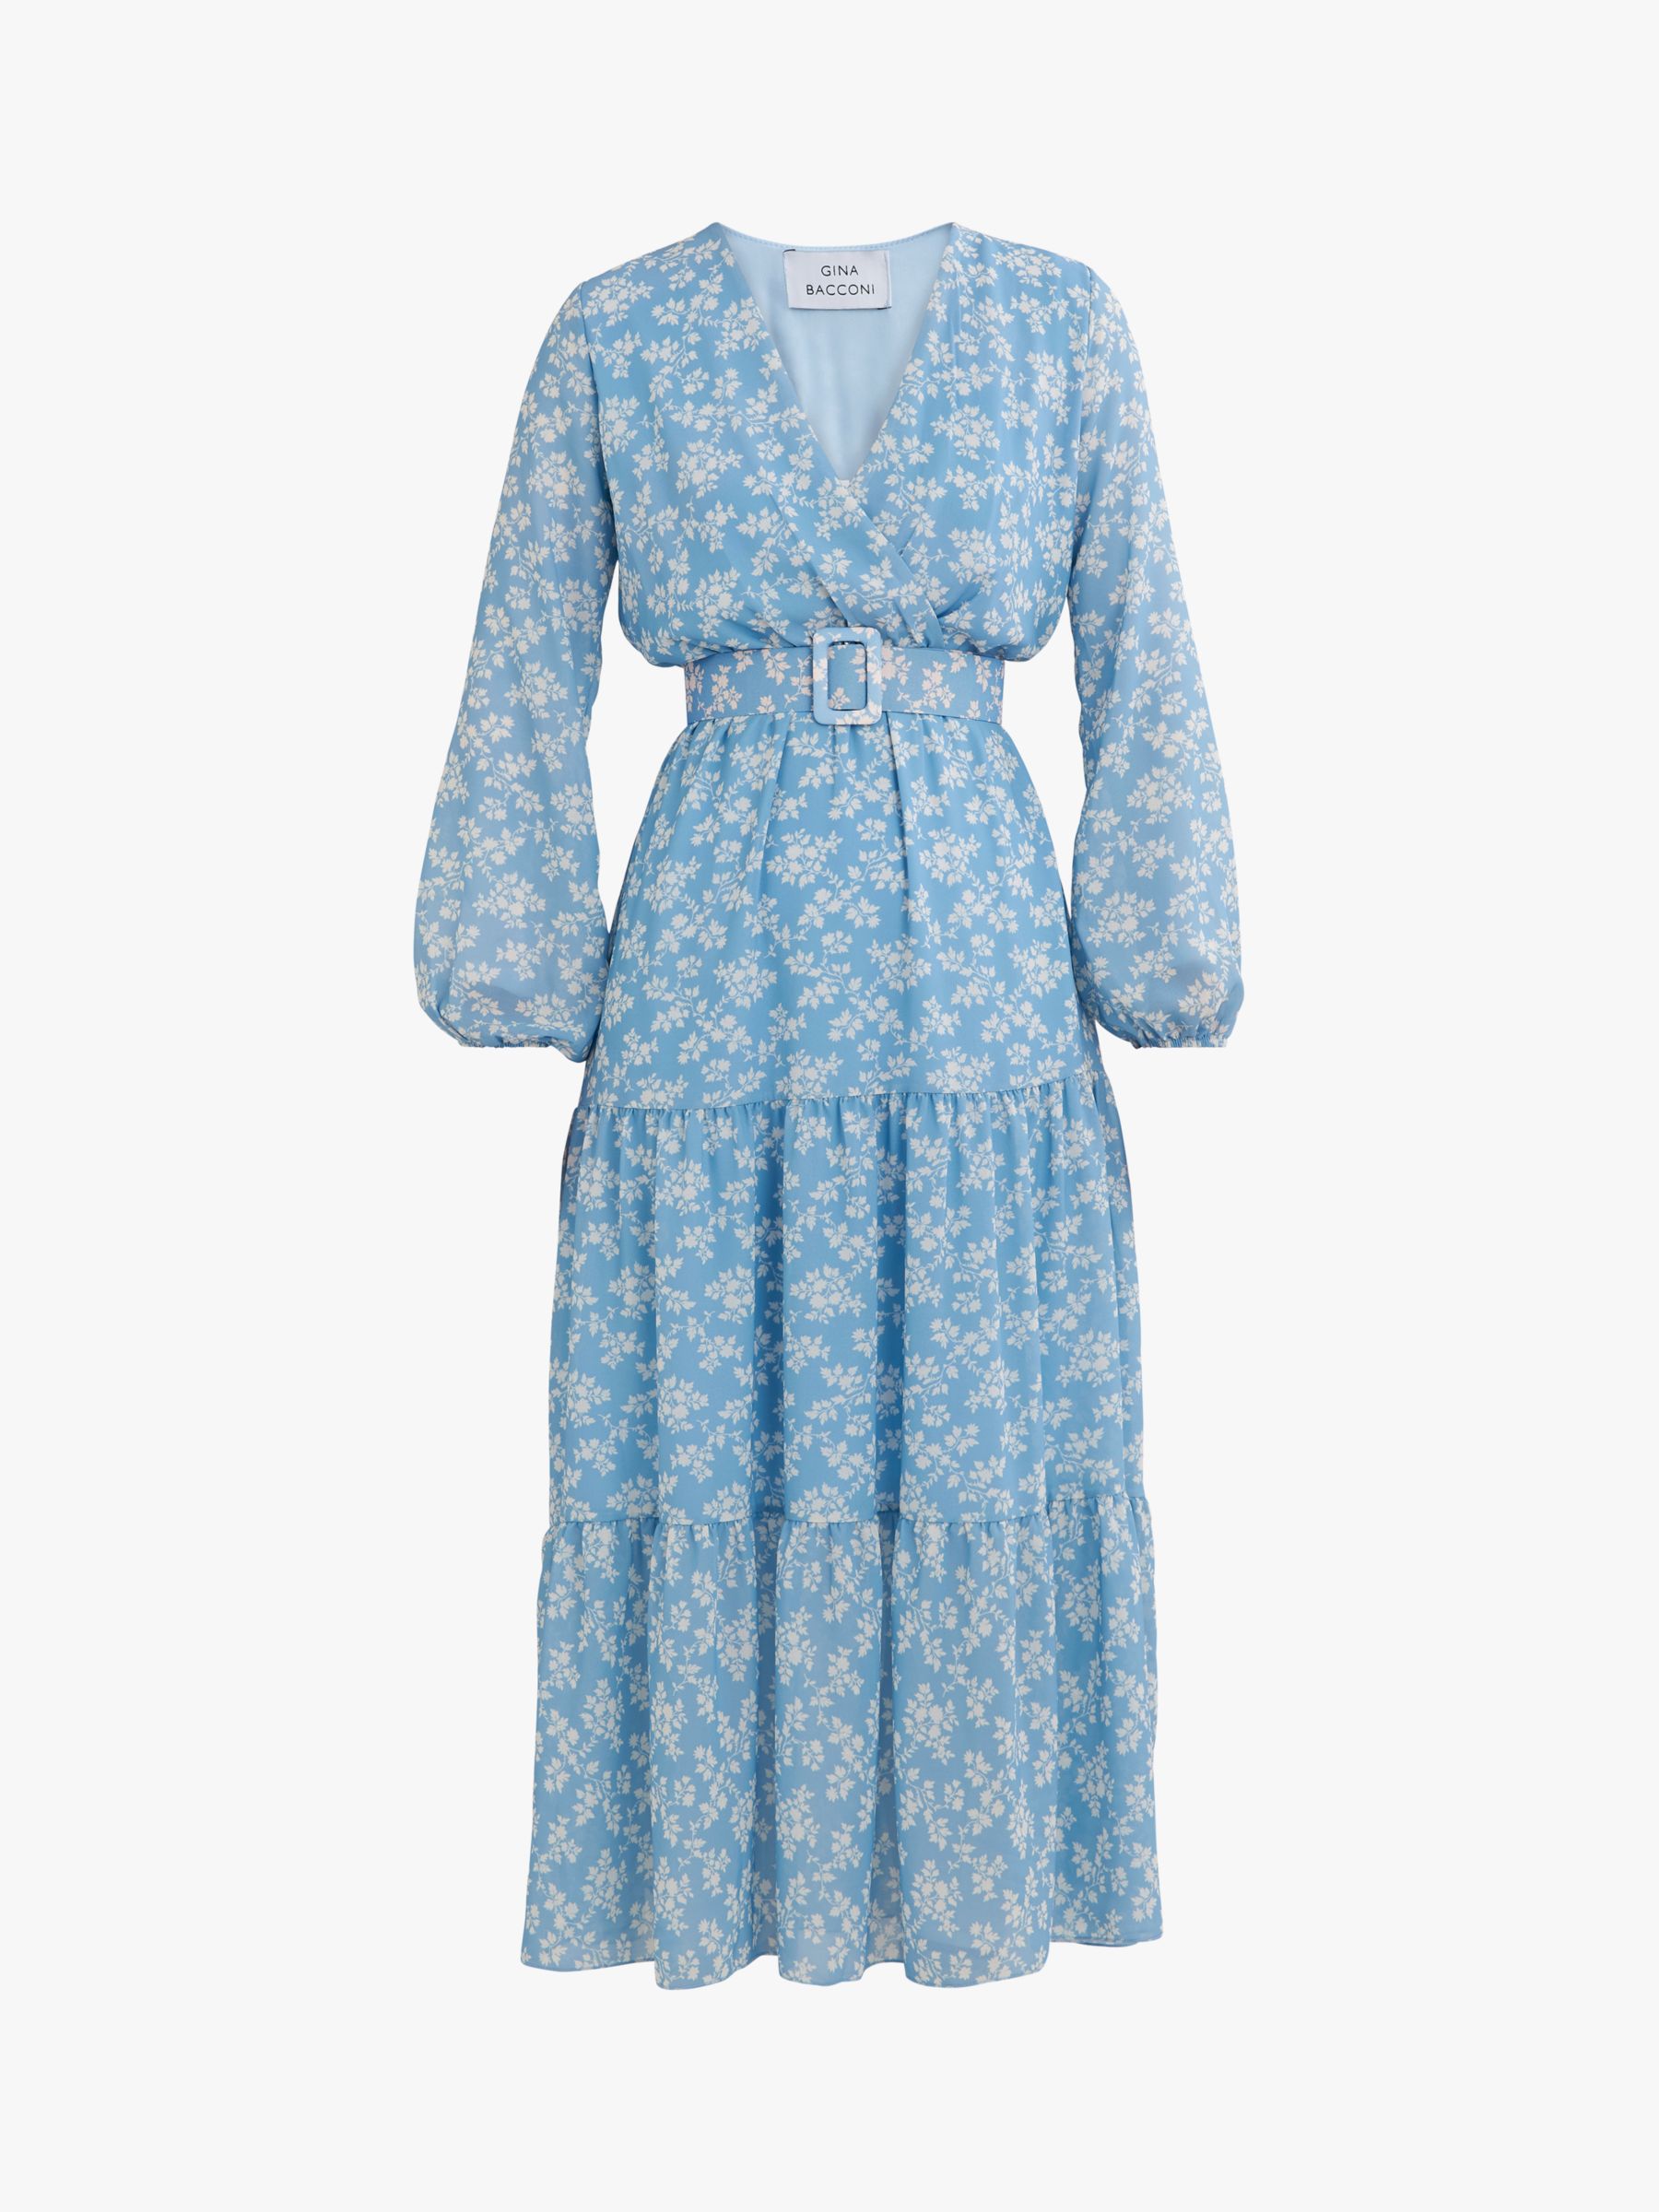 Gina Bacconi Reve Floral Tiered Maxi Dress, Pale Blue at John Lewis ...